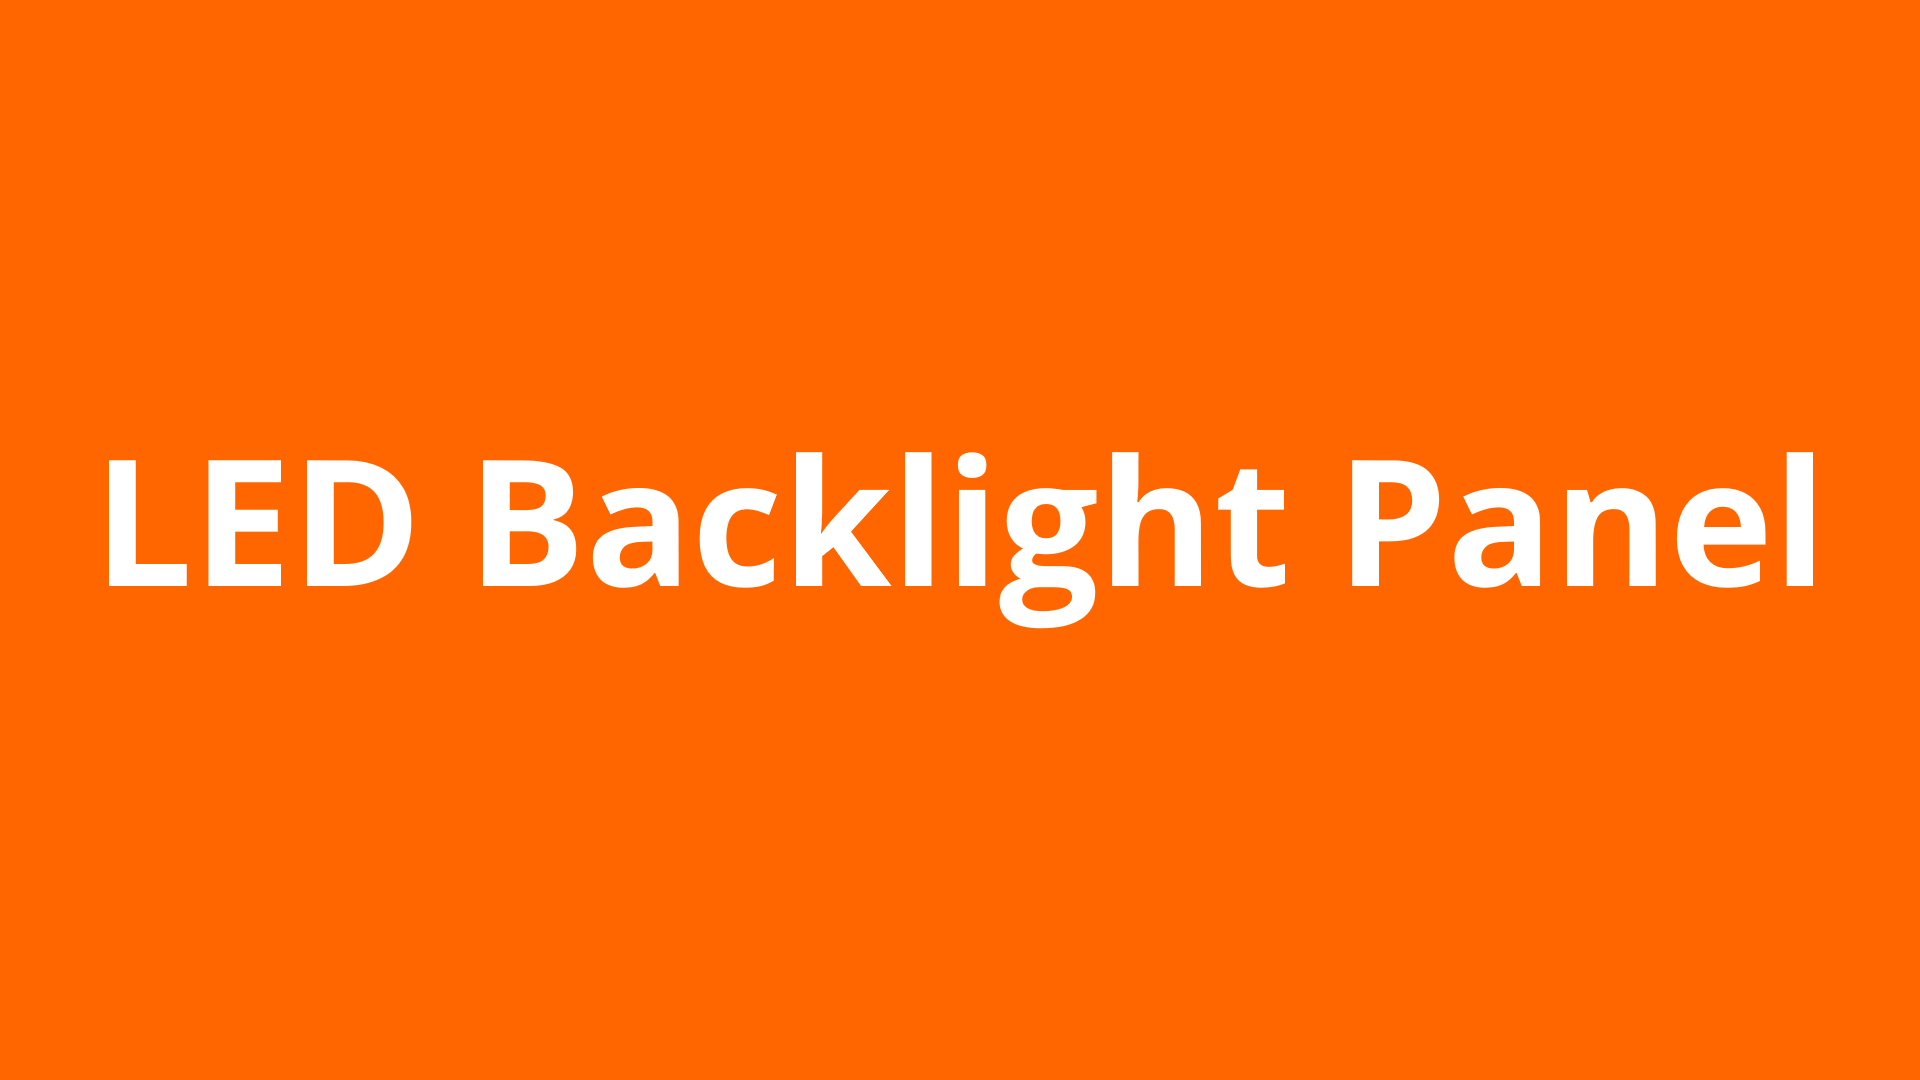 What Are LED Backlight Panel Lights?